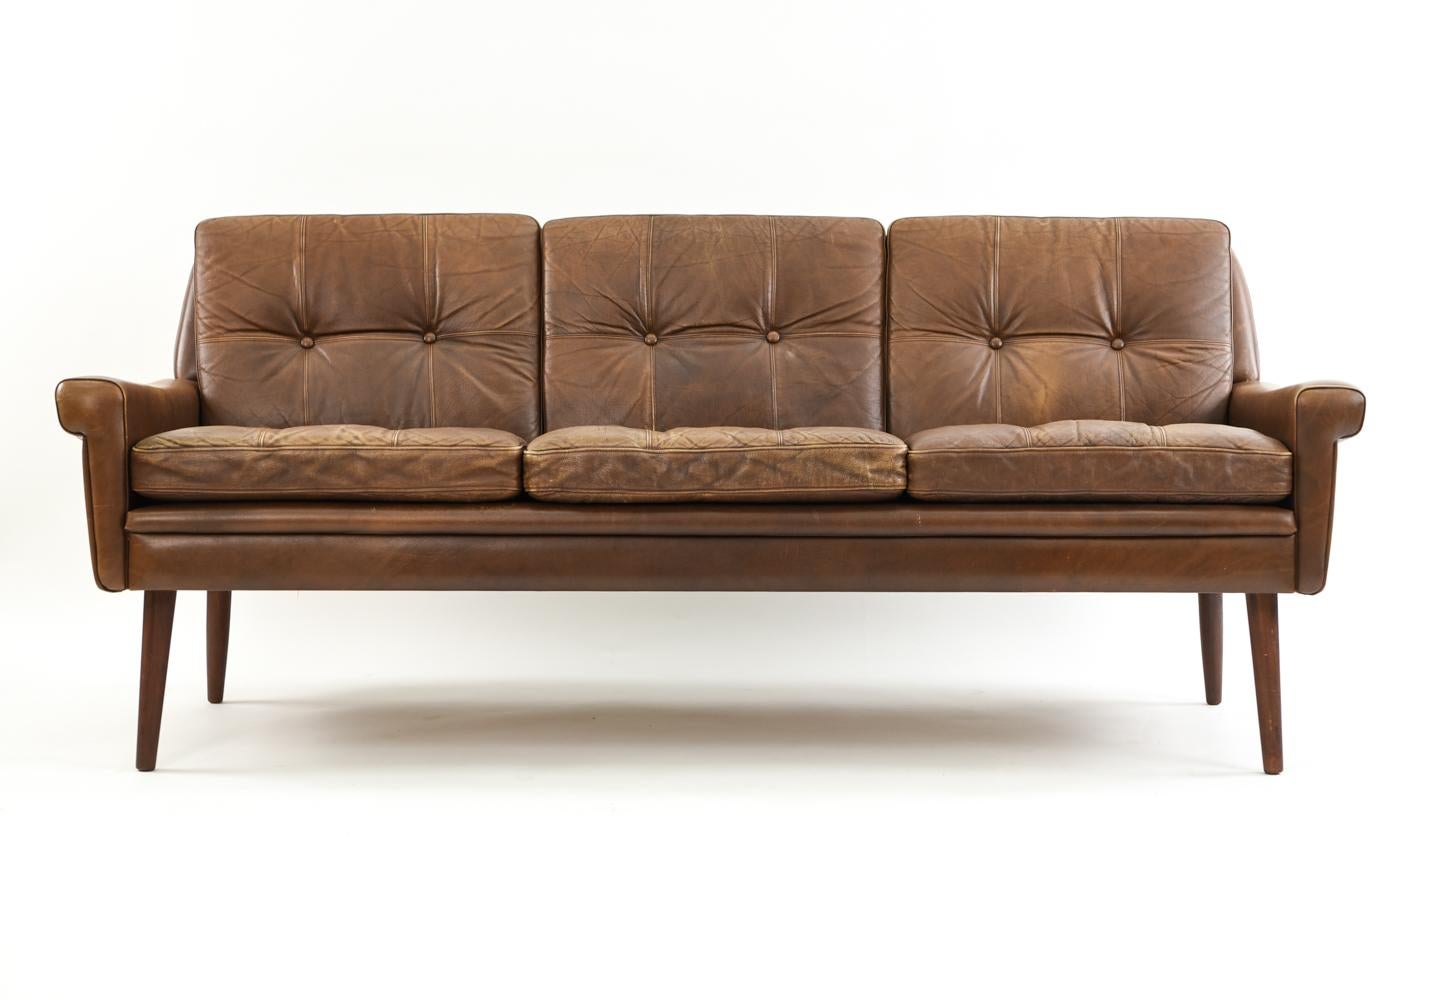 This Danish midcentury three-seat sofa designed by Svend Skipper and manufactured by Skippers Møbler is upholstered in supple, patinated brown leather with tufted backrests.